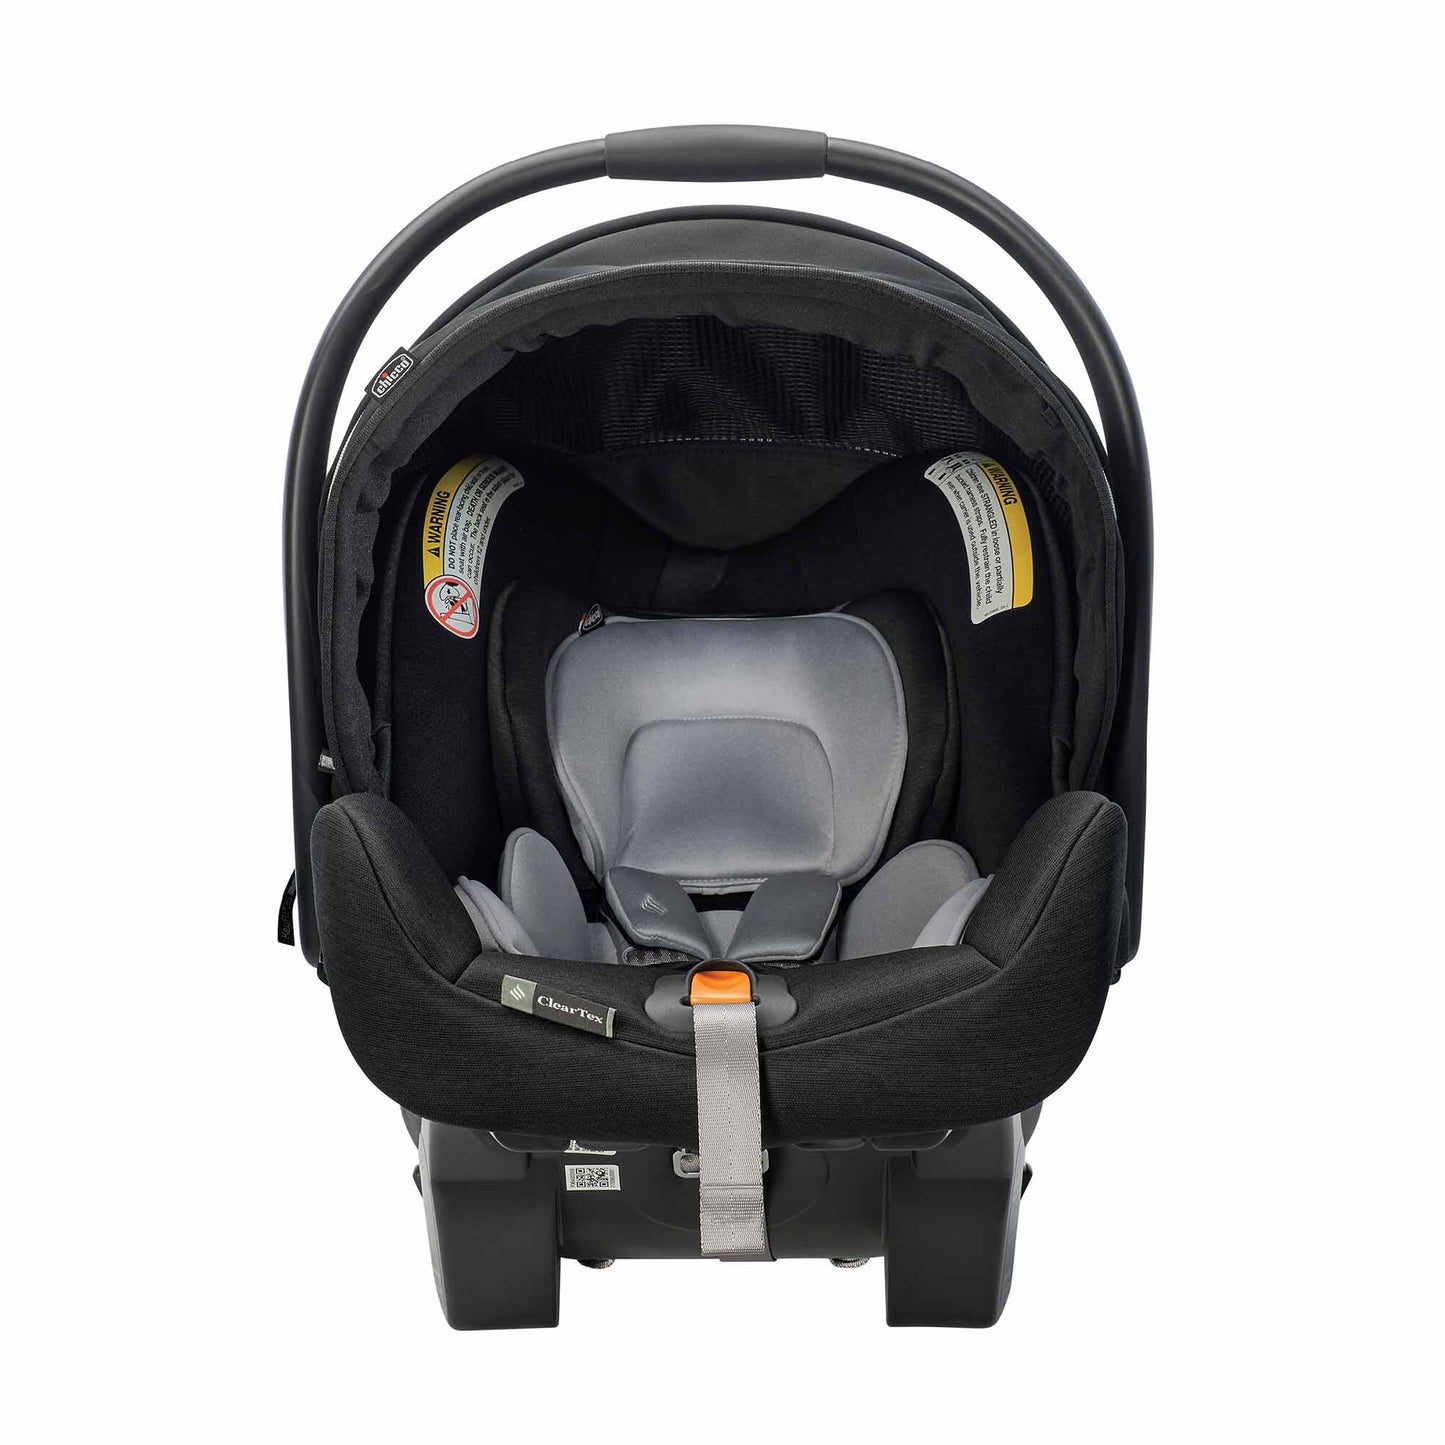 New Chicco KeyFit 30 Zip Infant Car Seat and Base (Obsidian)